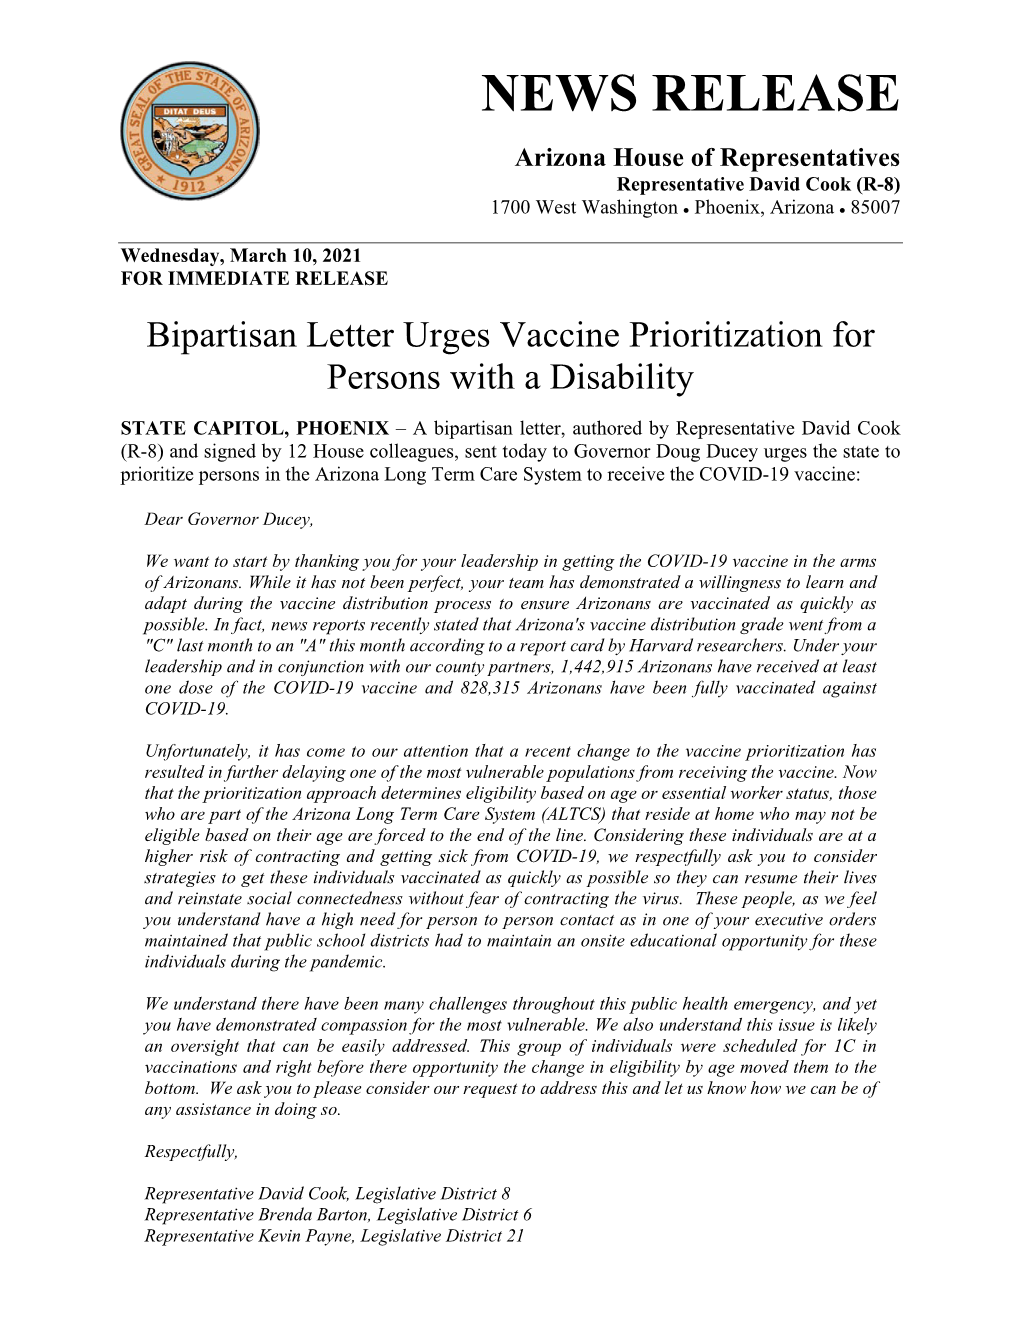 Bipartisan Letter Urges Vaccine Prioritization for Persons with a Disability